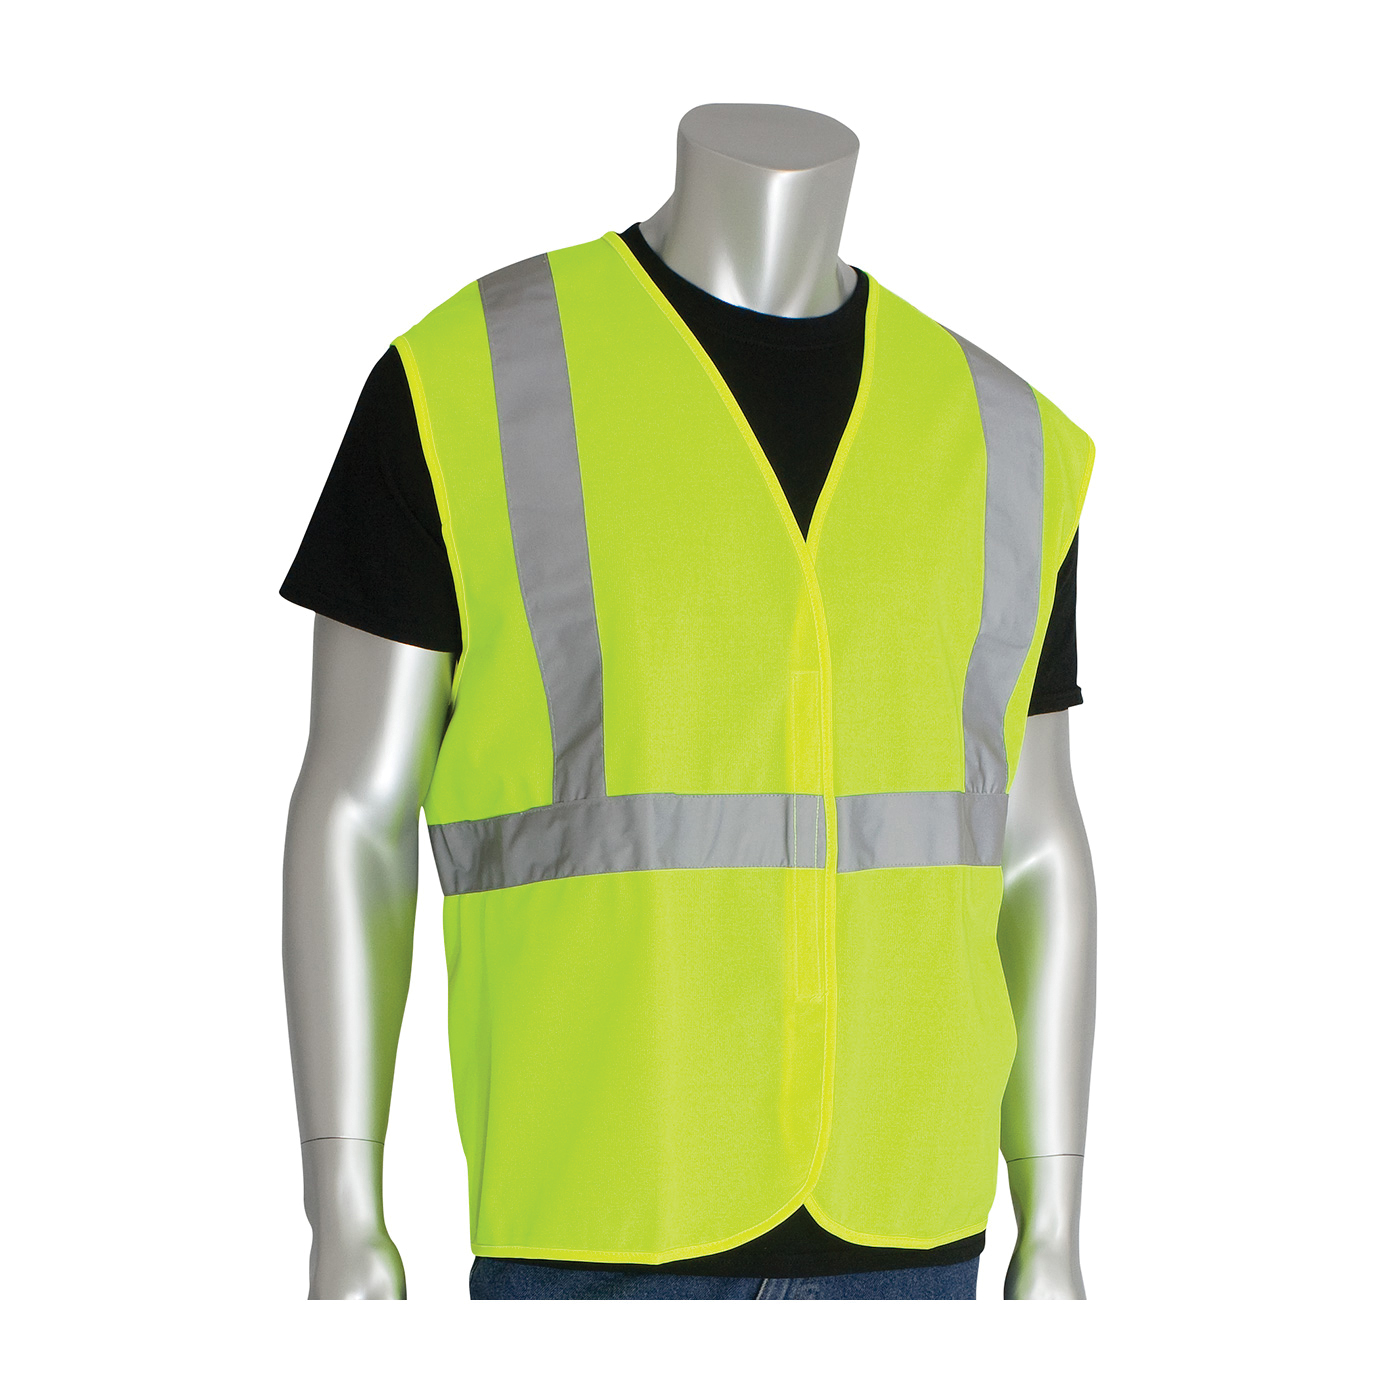 PIP® 302-WCENGLY-2X Solid Vest, 2XL, Hi-Viz Lime Yellow, Polyester, Hook and Loop Closure, ANSI Class: Class 2, Specifications Met: ANSI 107 Type R